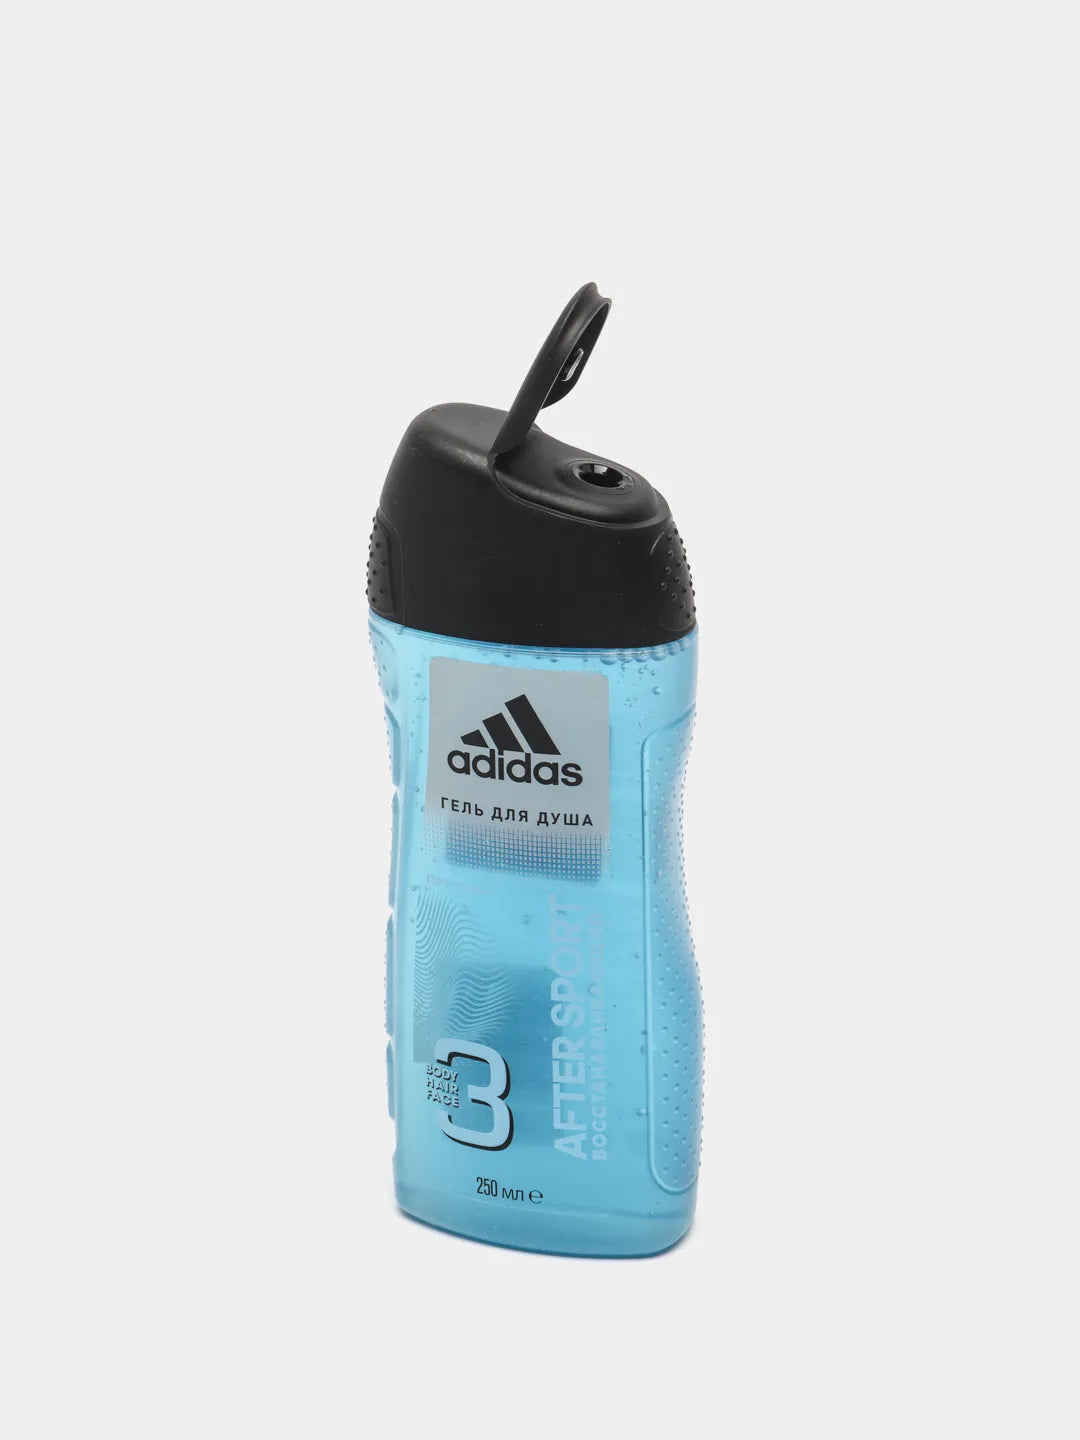 Adidas After Sport 3 In 1 Body, Hair & Face Protein Hydrating Shower Gel-400ml